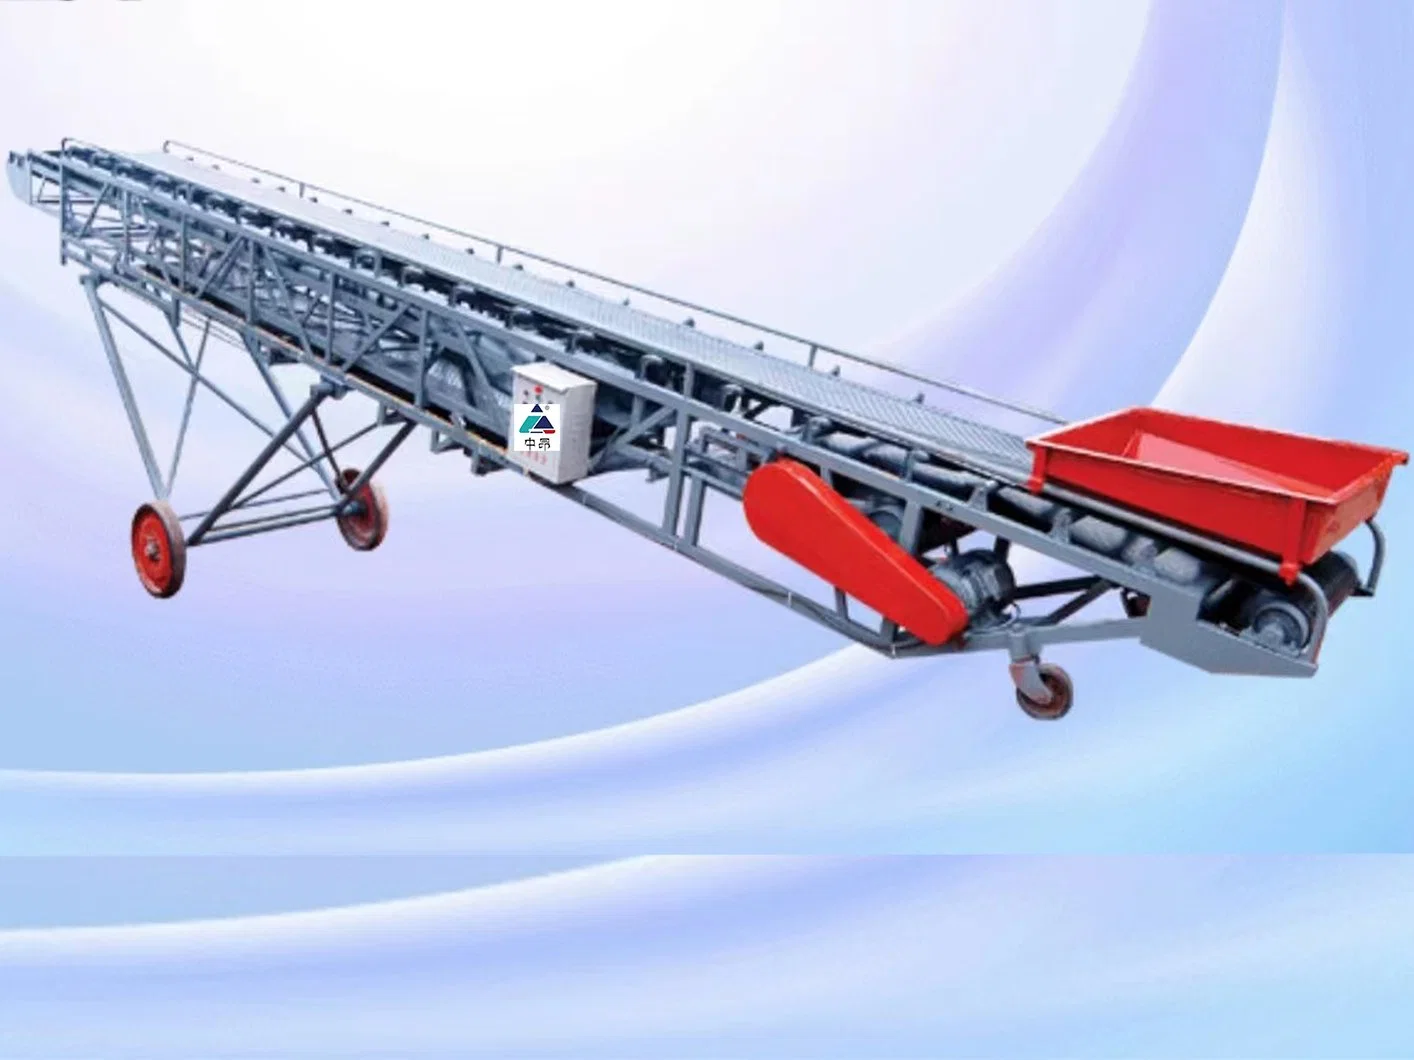 Mobile Grain Conveyor. Detachable Hopper for Convenient and Efficient Transportation of Grain Products Such as Corn and Soybeans, with No Loss or Damage.